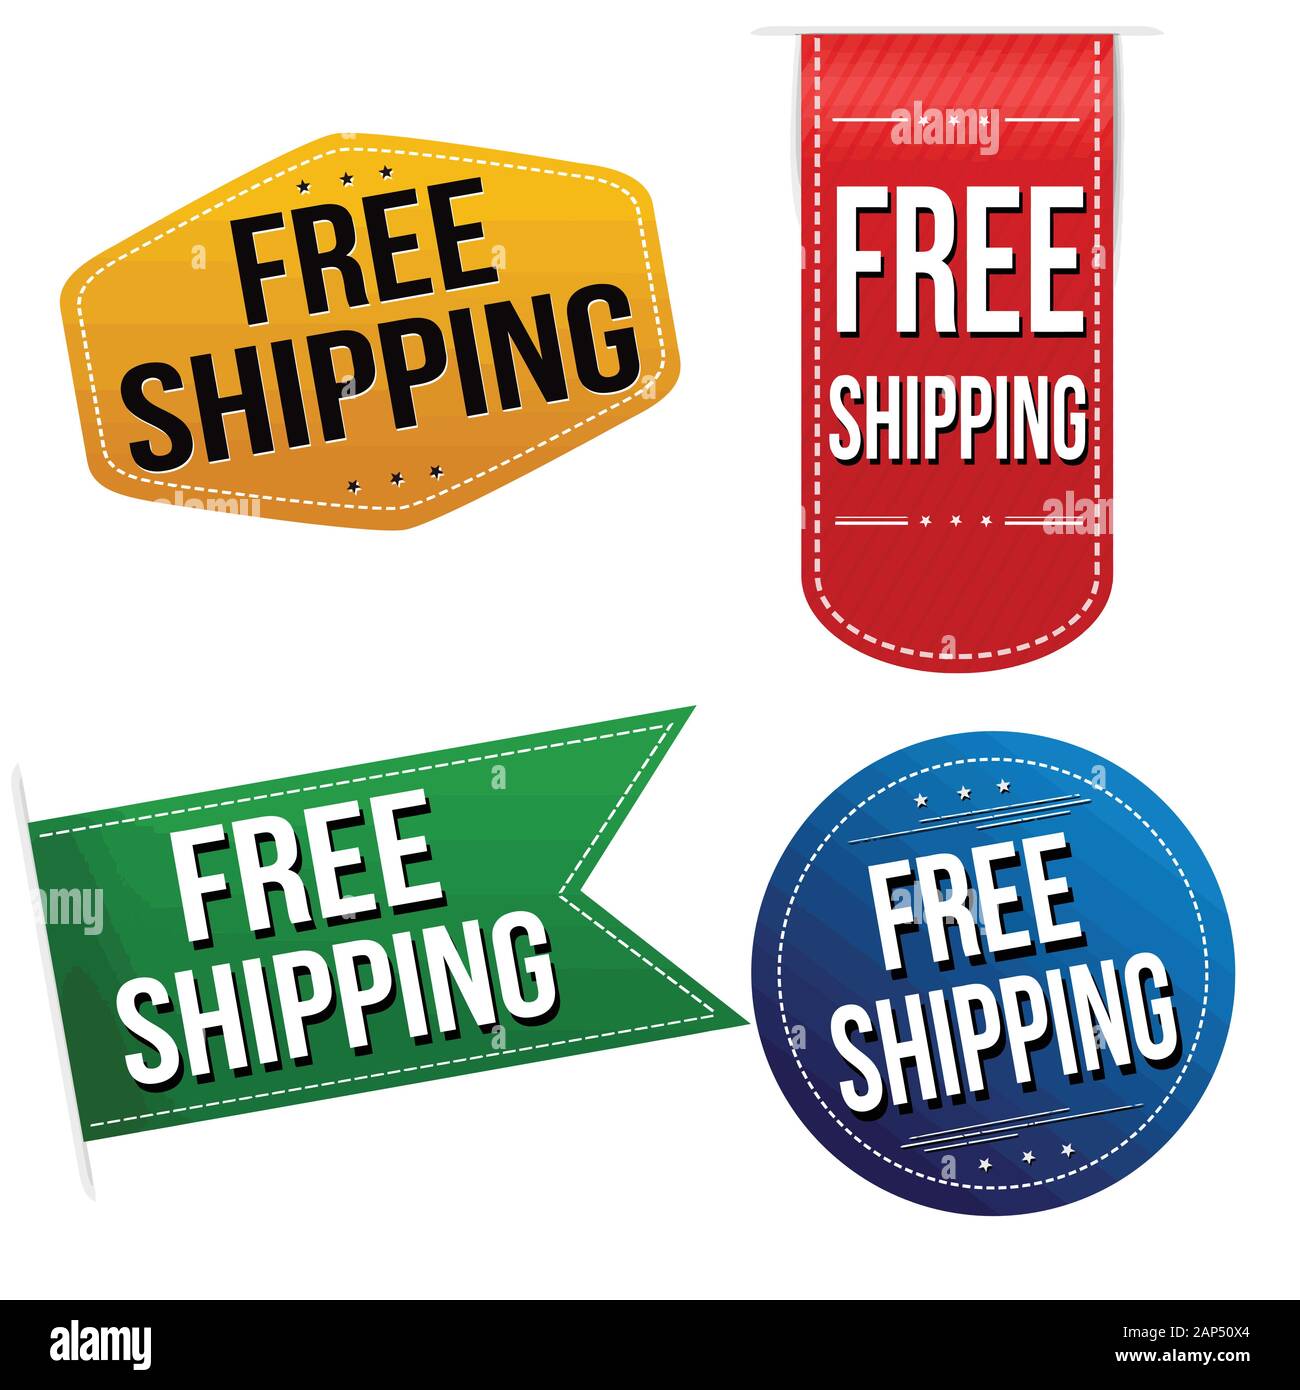 Free shipping sticker or label set on white background, vector illustration Stock Vector